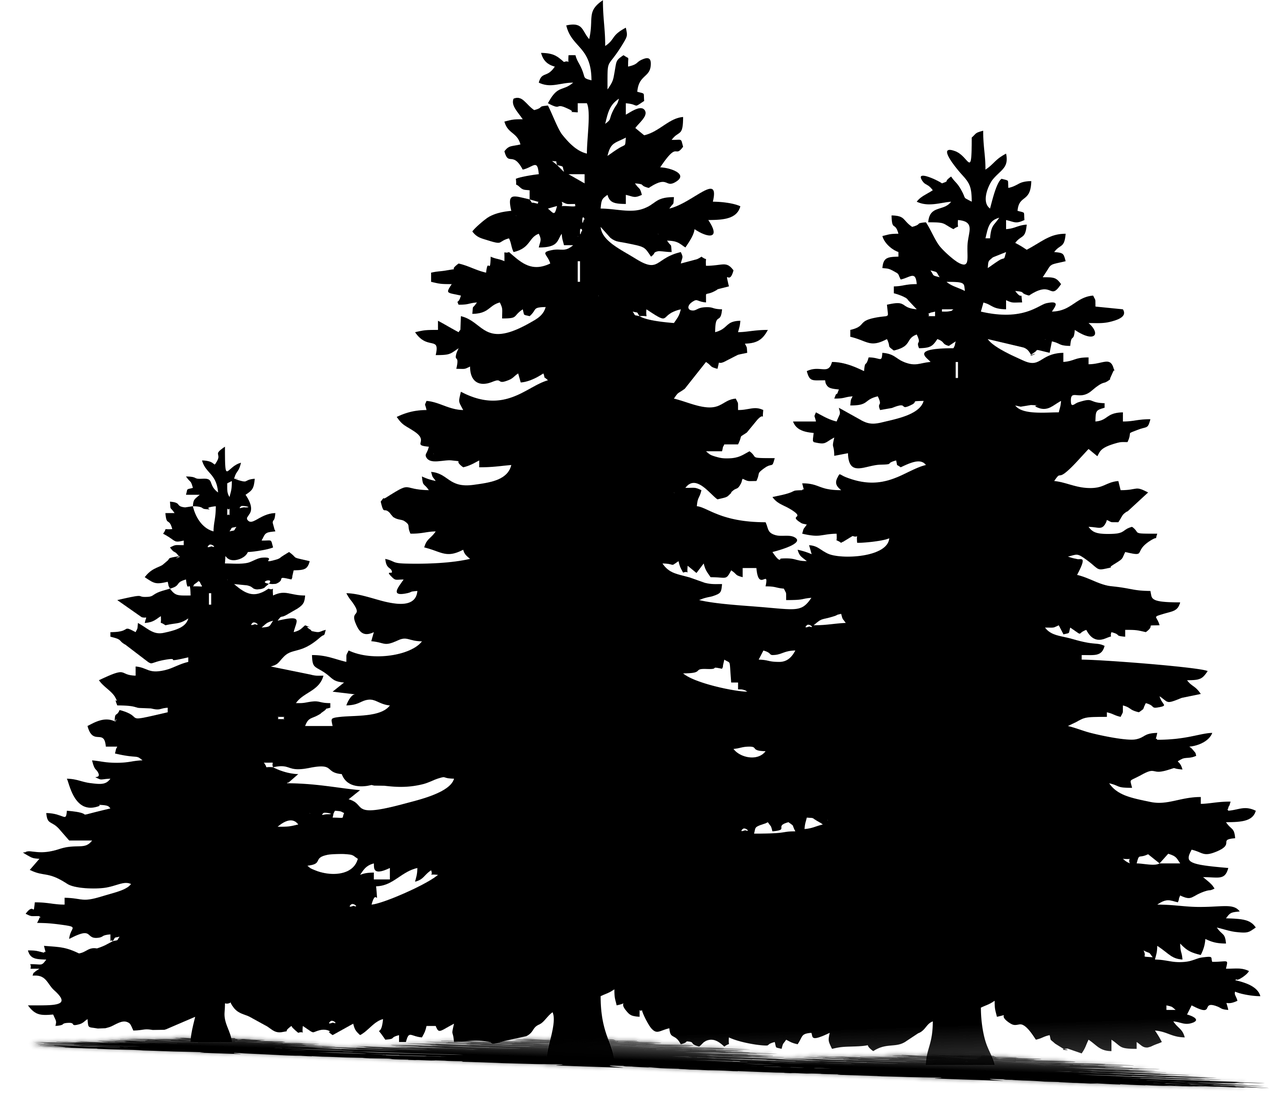 a man riding a skateboard up the side of a ramp, by Ryoji Ikeda, minimalism, black oled background, webcam footage, solid black #000000 background, standing alone